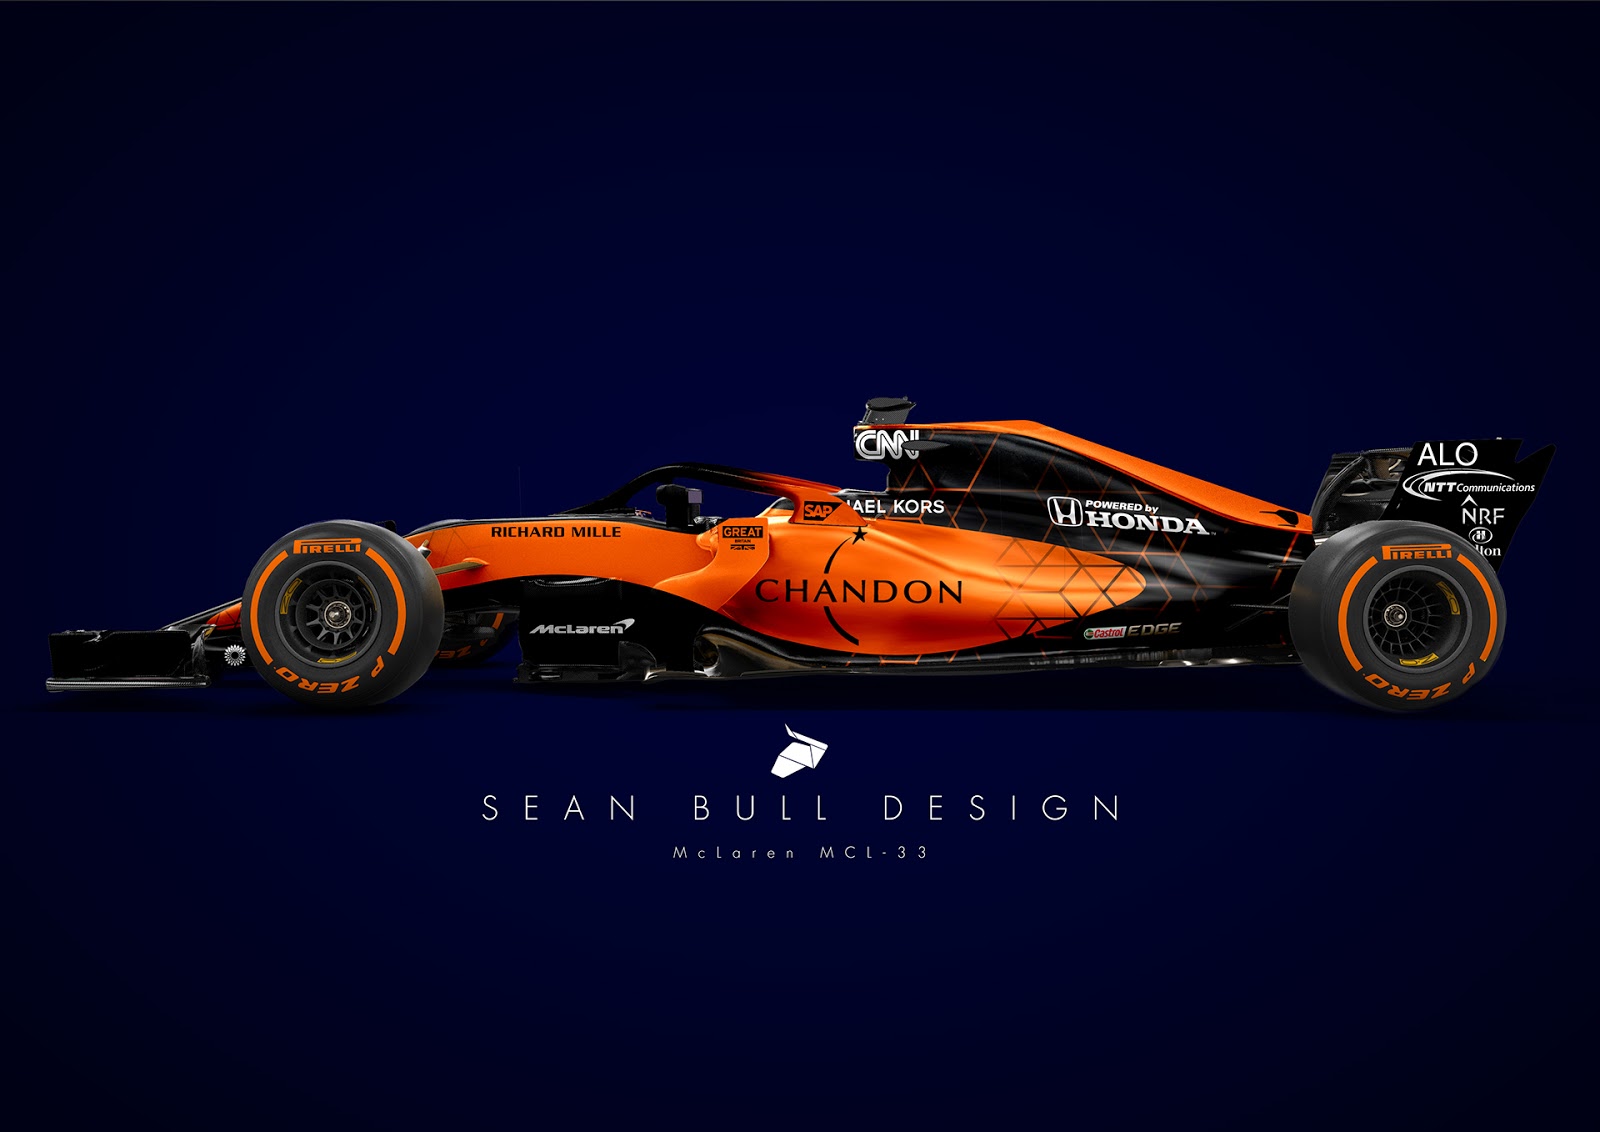 2018 F1 Liveries Could Make The Halo Look Almost Acceptable | Carscoops1600 x 1132